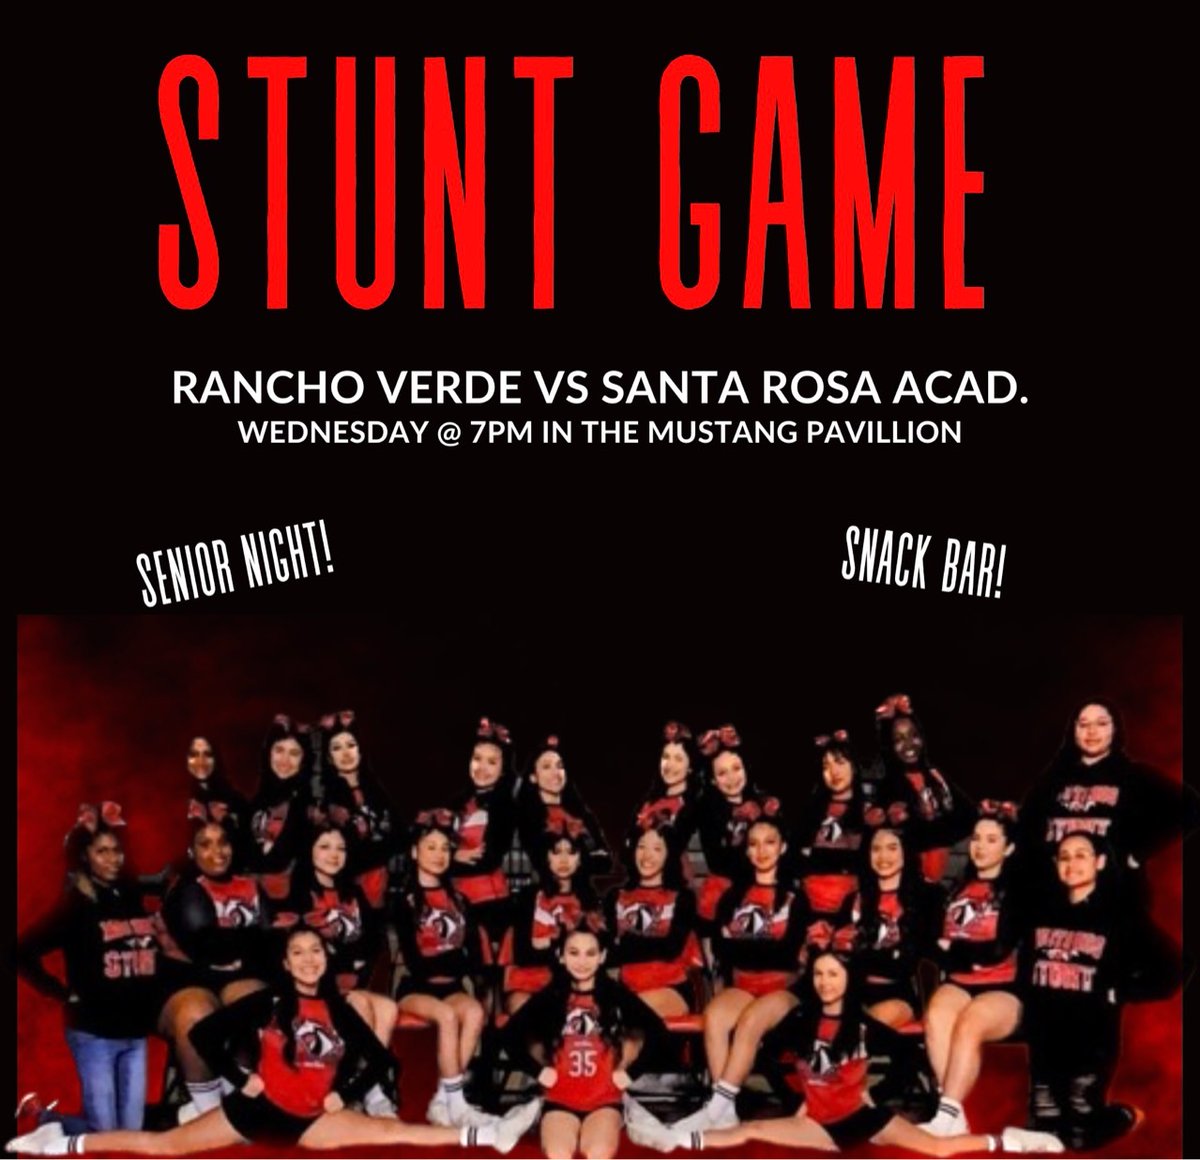 The Varsity Stunt Team will be hosting their first home game this Wednesday, May 3, 2023 in the New Gym from 5 pm-8 pm. Please come out and support!